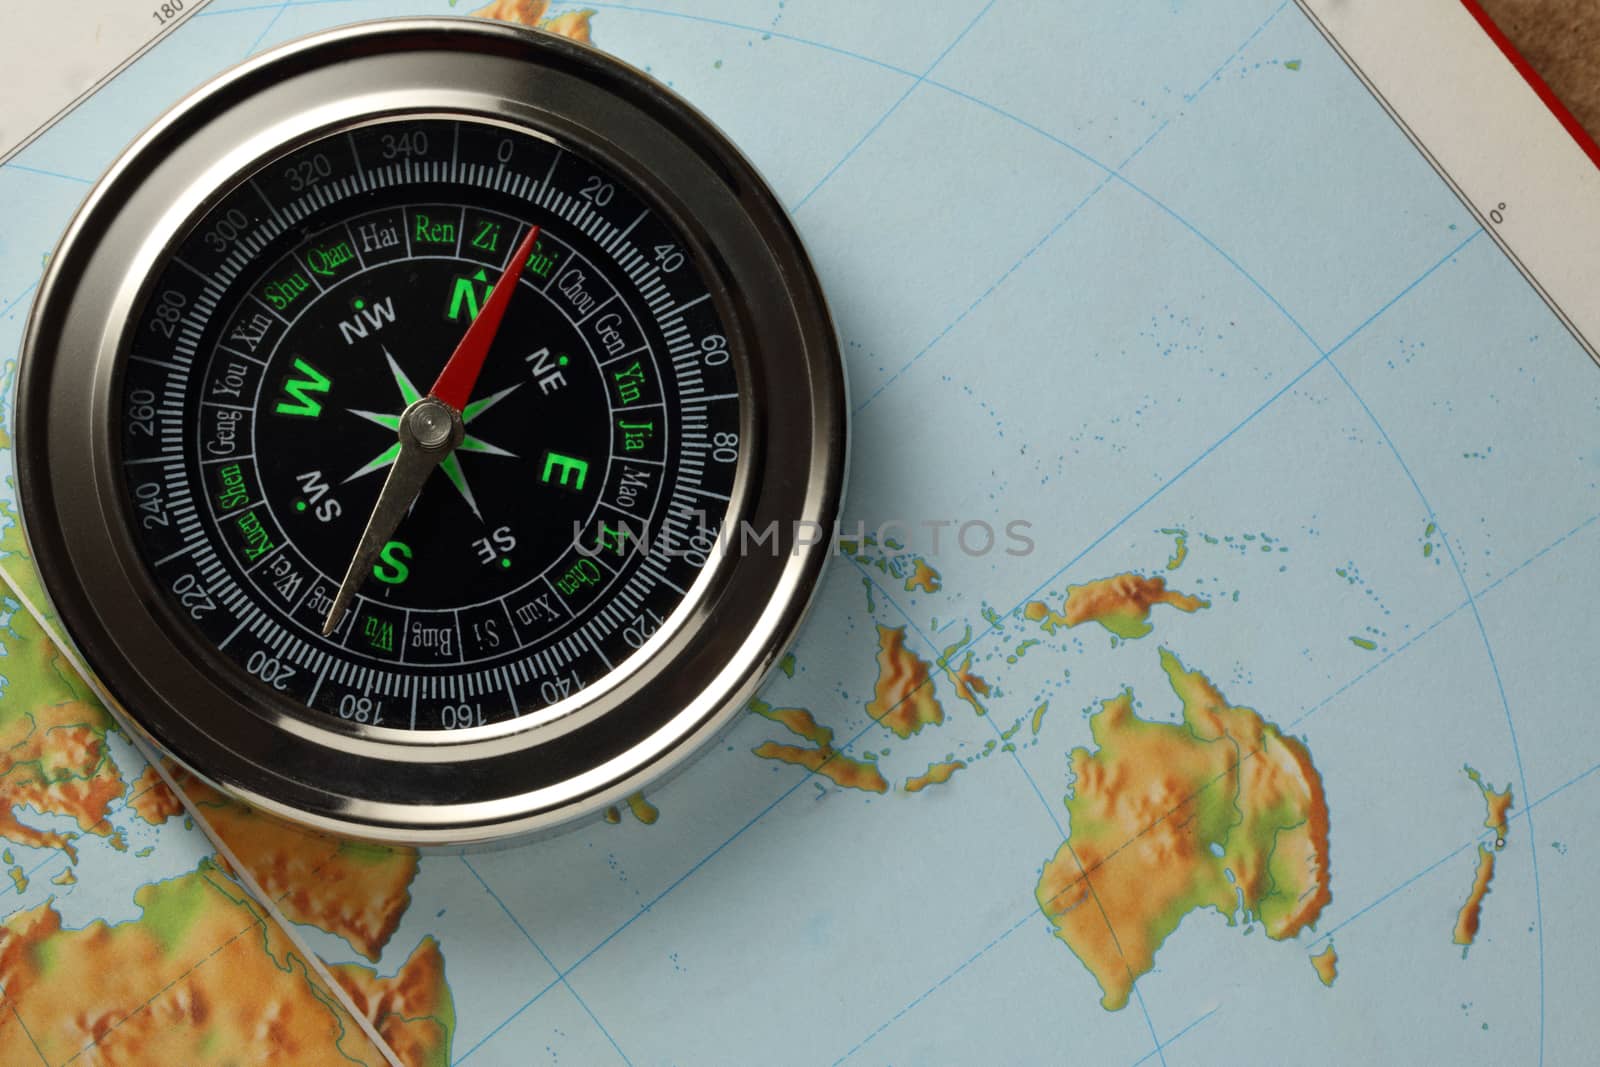 Compass on Earth map background